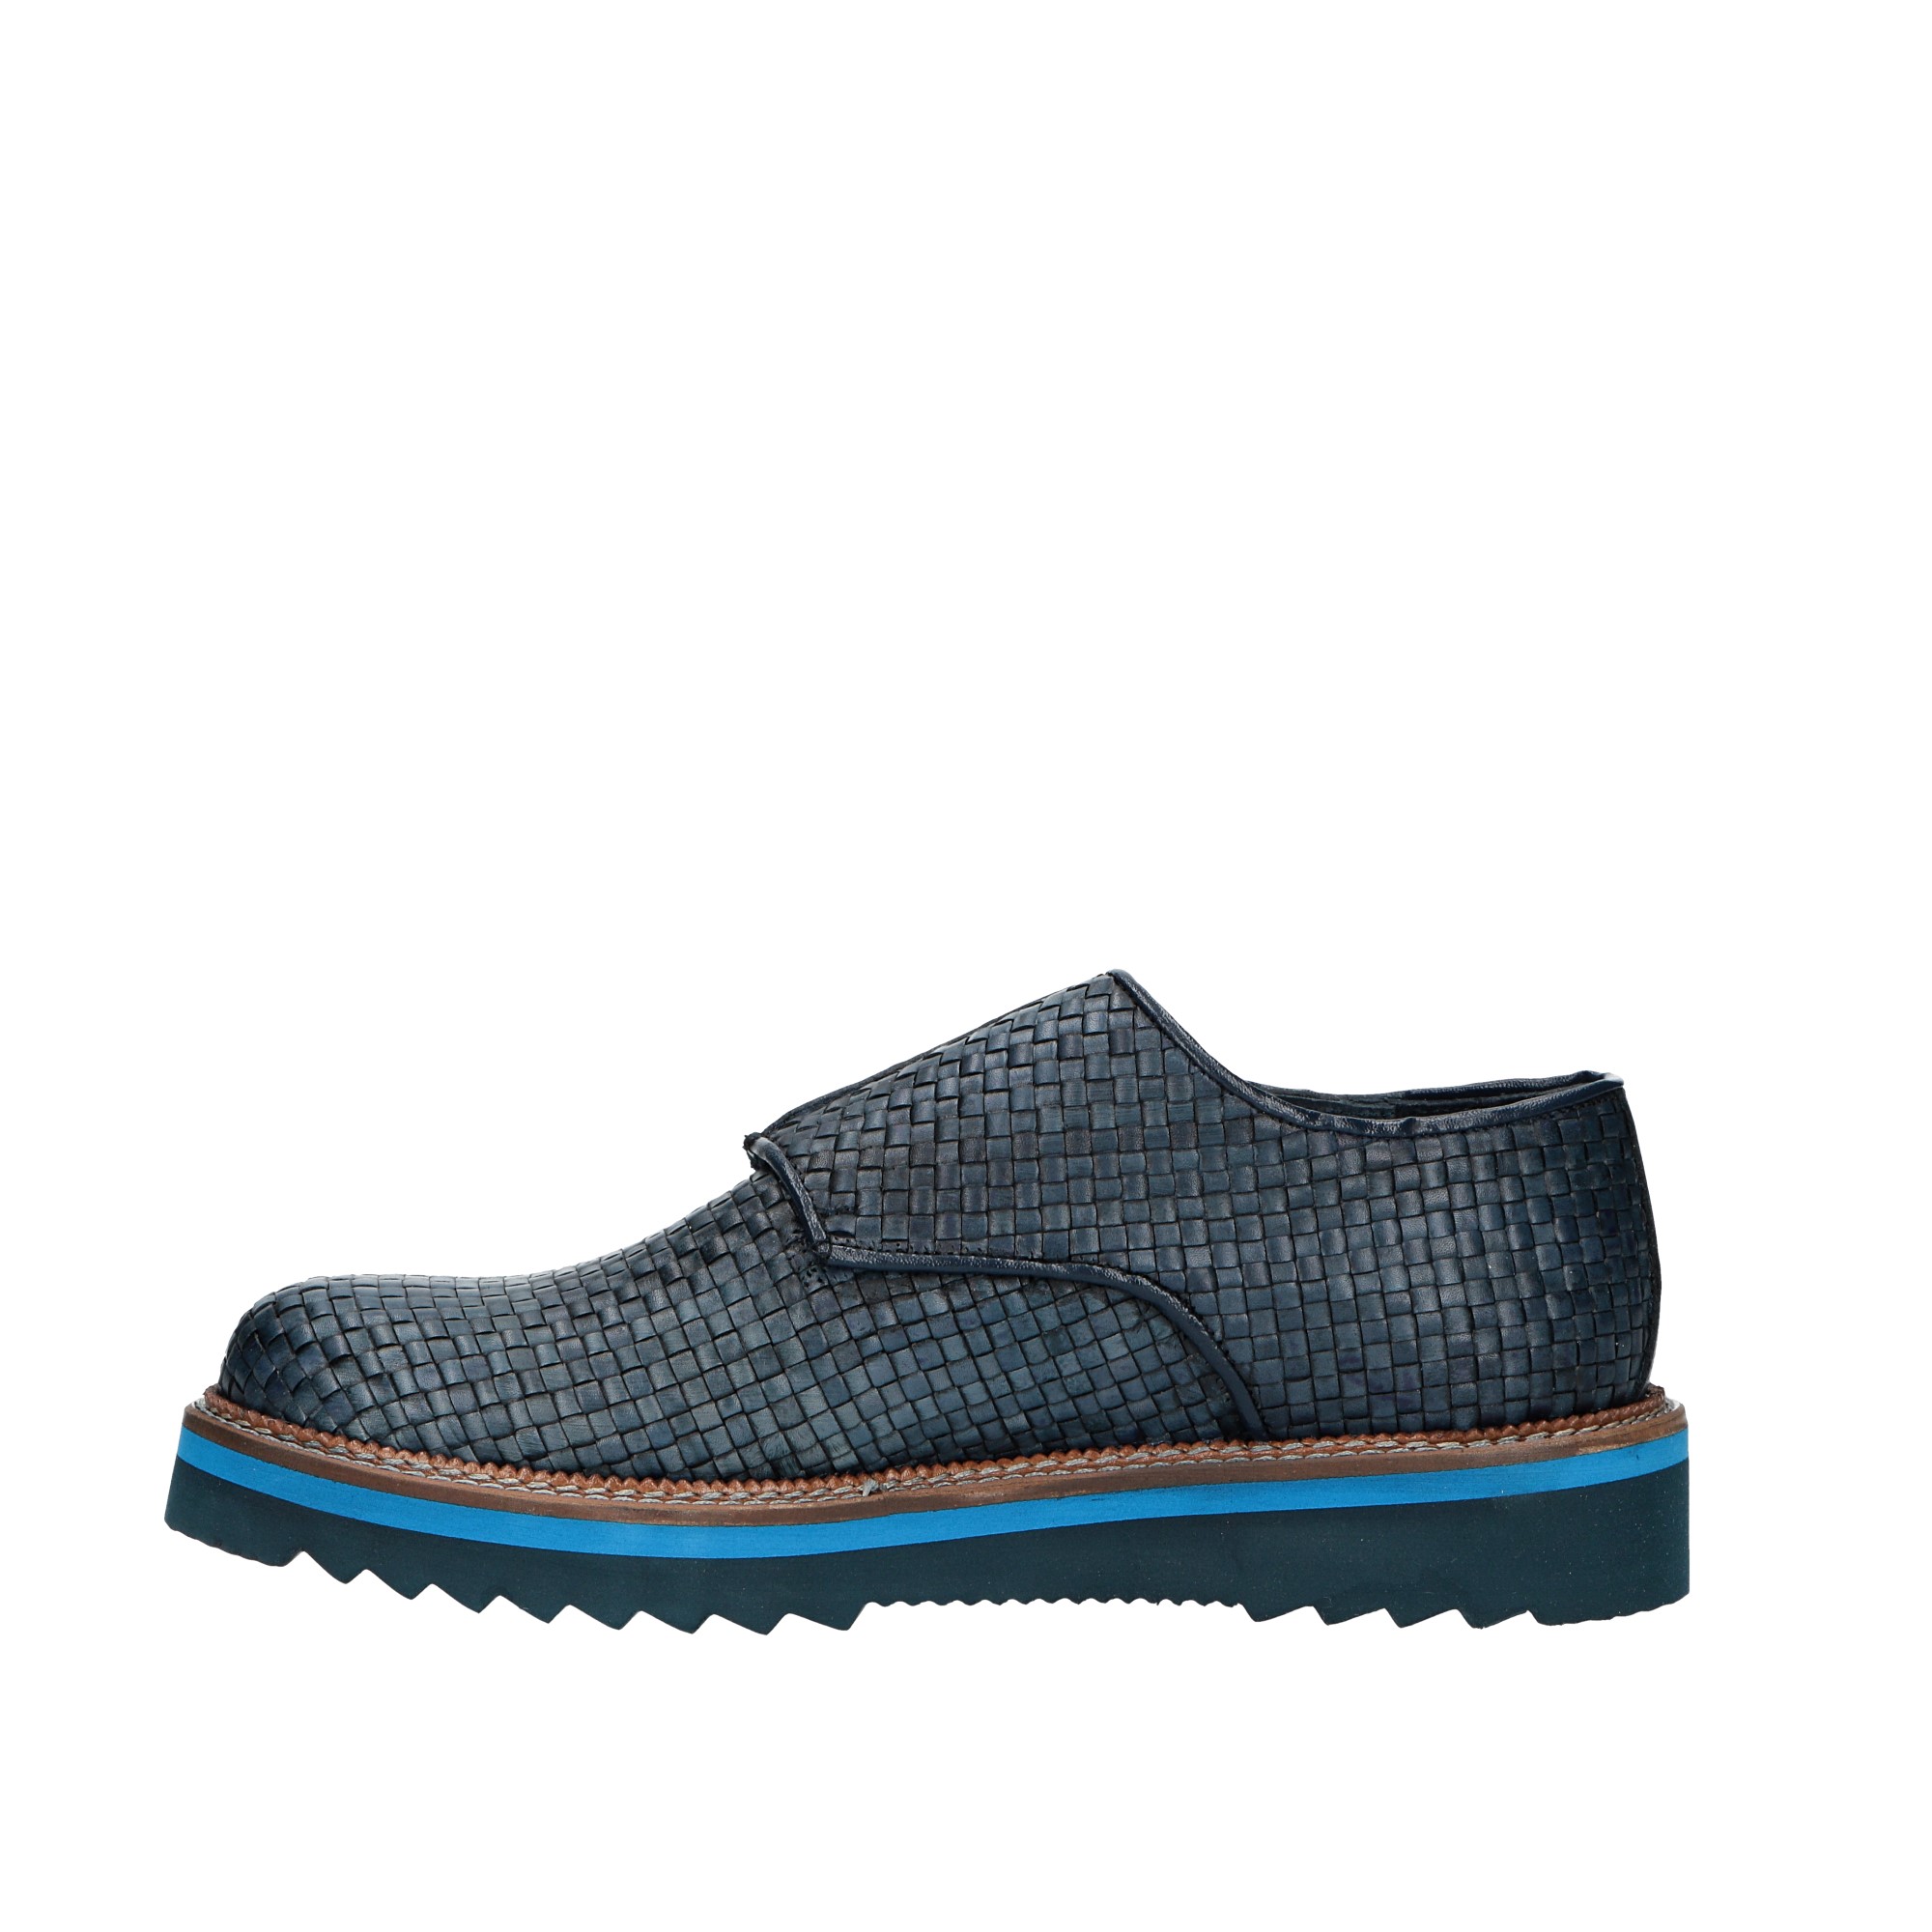 Campo neutro - braided leather shoe with flap: online sale on Claros ...